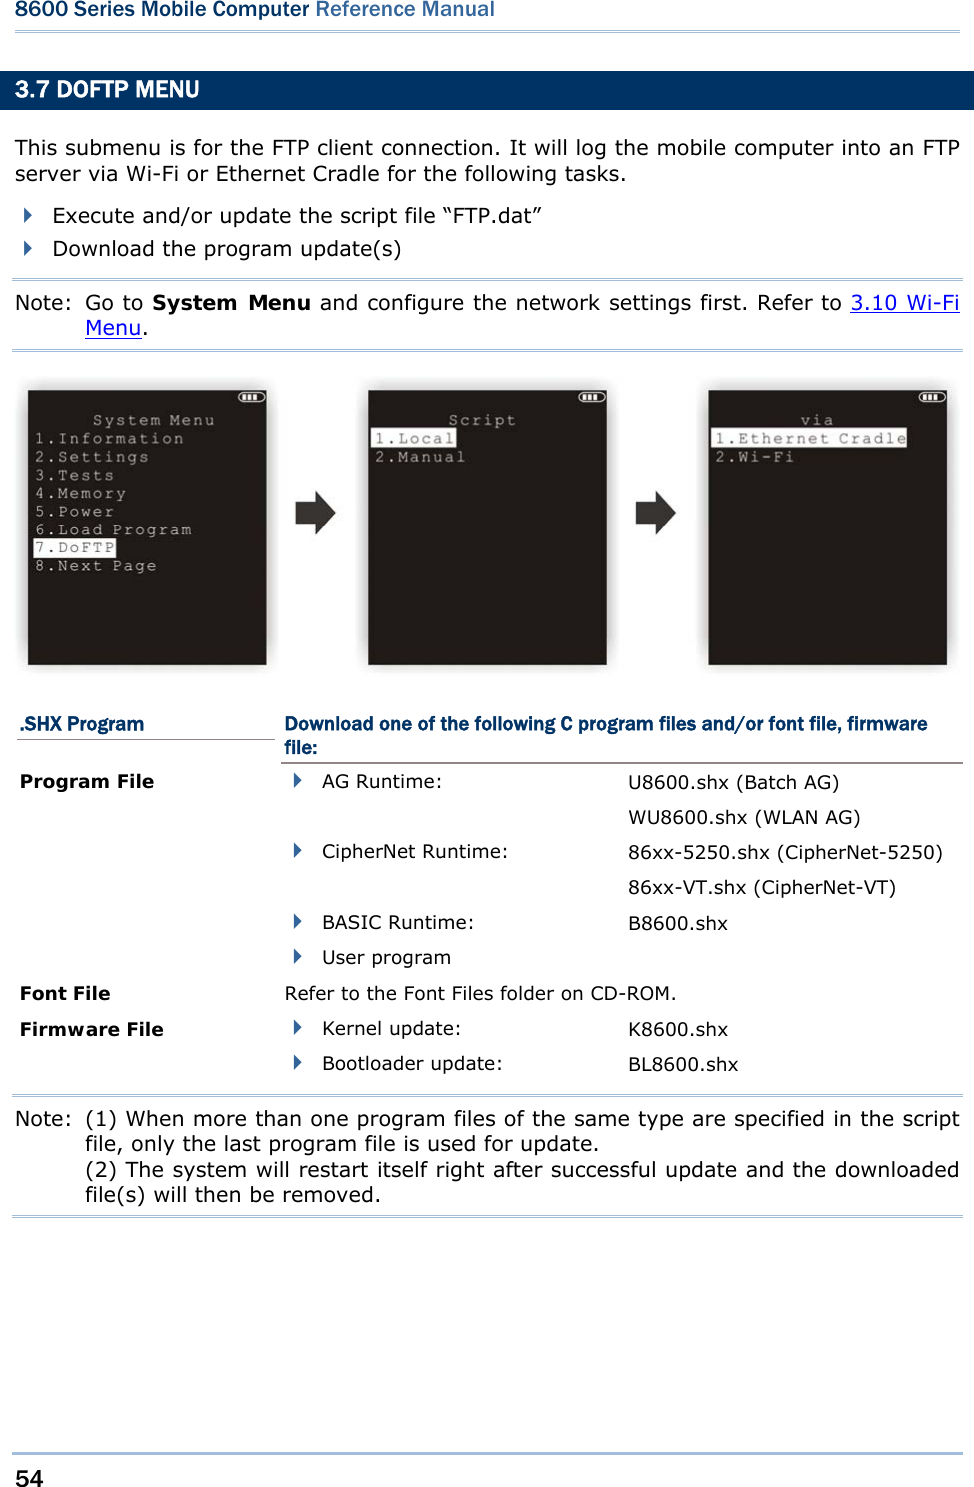 54  8600 Series Mobile Computer Reference Manual  3.7 DOFTP MENU This submenu is for the FTP client connection. It will log the mobile computer into an FTP server via Wi-Fi or Ethernet Cradle for the following tasks.  Execute and/or update the script file “FTP.dat”  Download the program update(s) Note: Go to System Menu and configure the network settings first. Refer to 3.10 Wi-Fi Menu.  .SHX Program  Download one of the following C program files and/or font file, firmware file: Program File   AG Runtime:  U8600.shx (Batch AG) WU8600.shx (WLAN AG)  CipherNet Runtime:  86xx-5250.shx (CipherNet-5250) 86xx-VT.shx (CipherNet-VT)  BASIC Runtime:  B8600.shx  User program   Font File  Refer to the Font Files folder on CD-ROM. Firmware File   Kernel update:  K8600.shx  Bootloader update:  BL8600.shx Note:  (1) When more than one program files of the same type are specified in the script file, only the last program file is used for update. (2) The system will restart itself right after successful update and the downloaded file(s) will then be removed.    